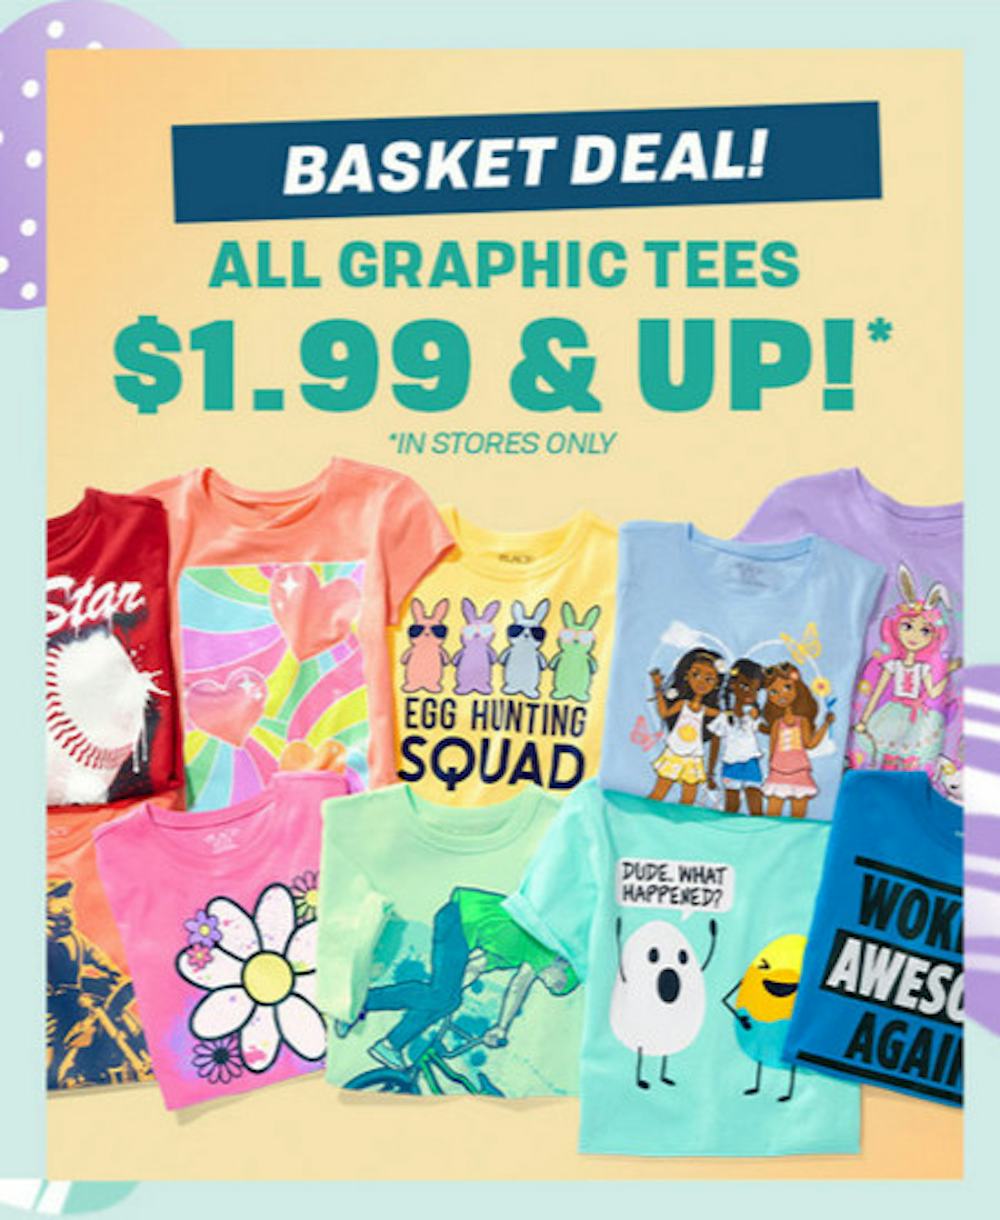 All Graphic Tees $1.99 and Up